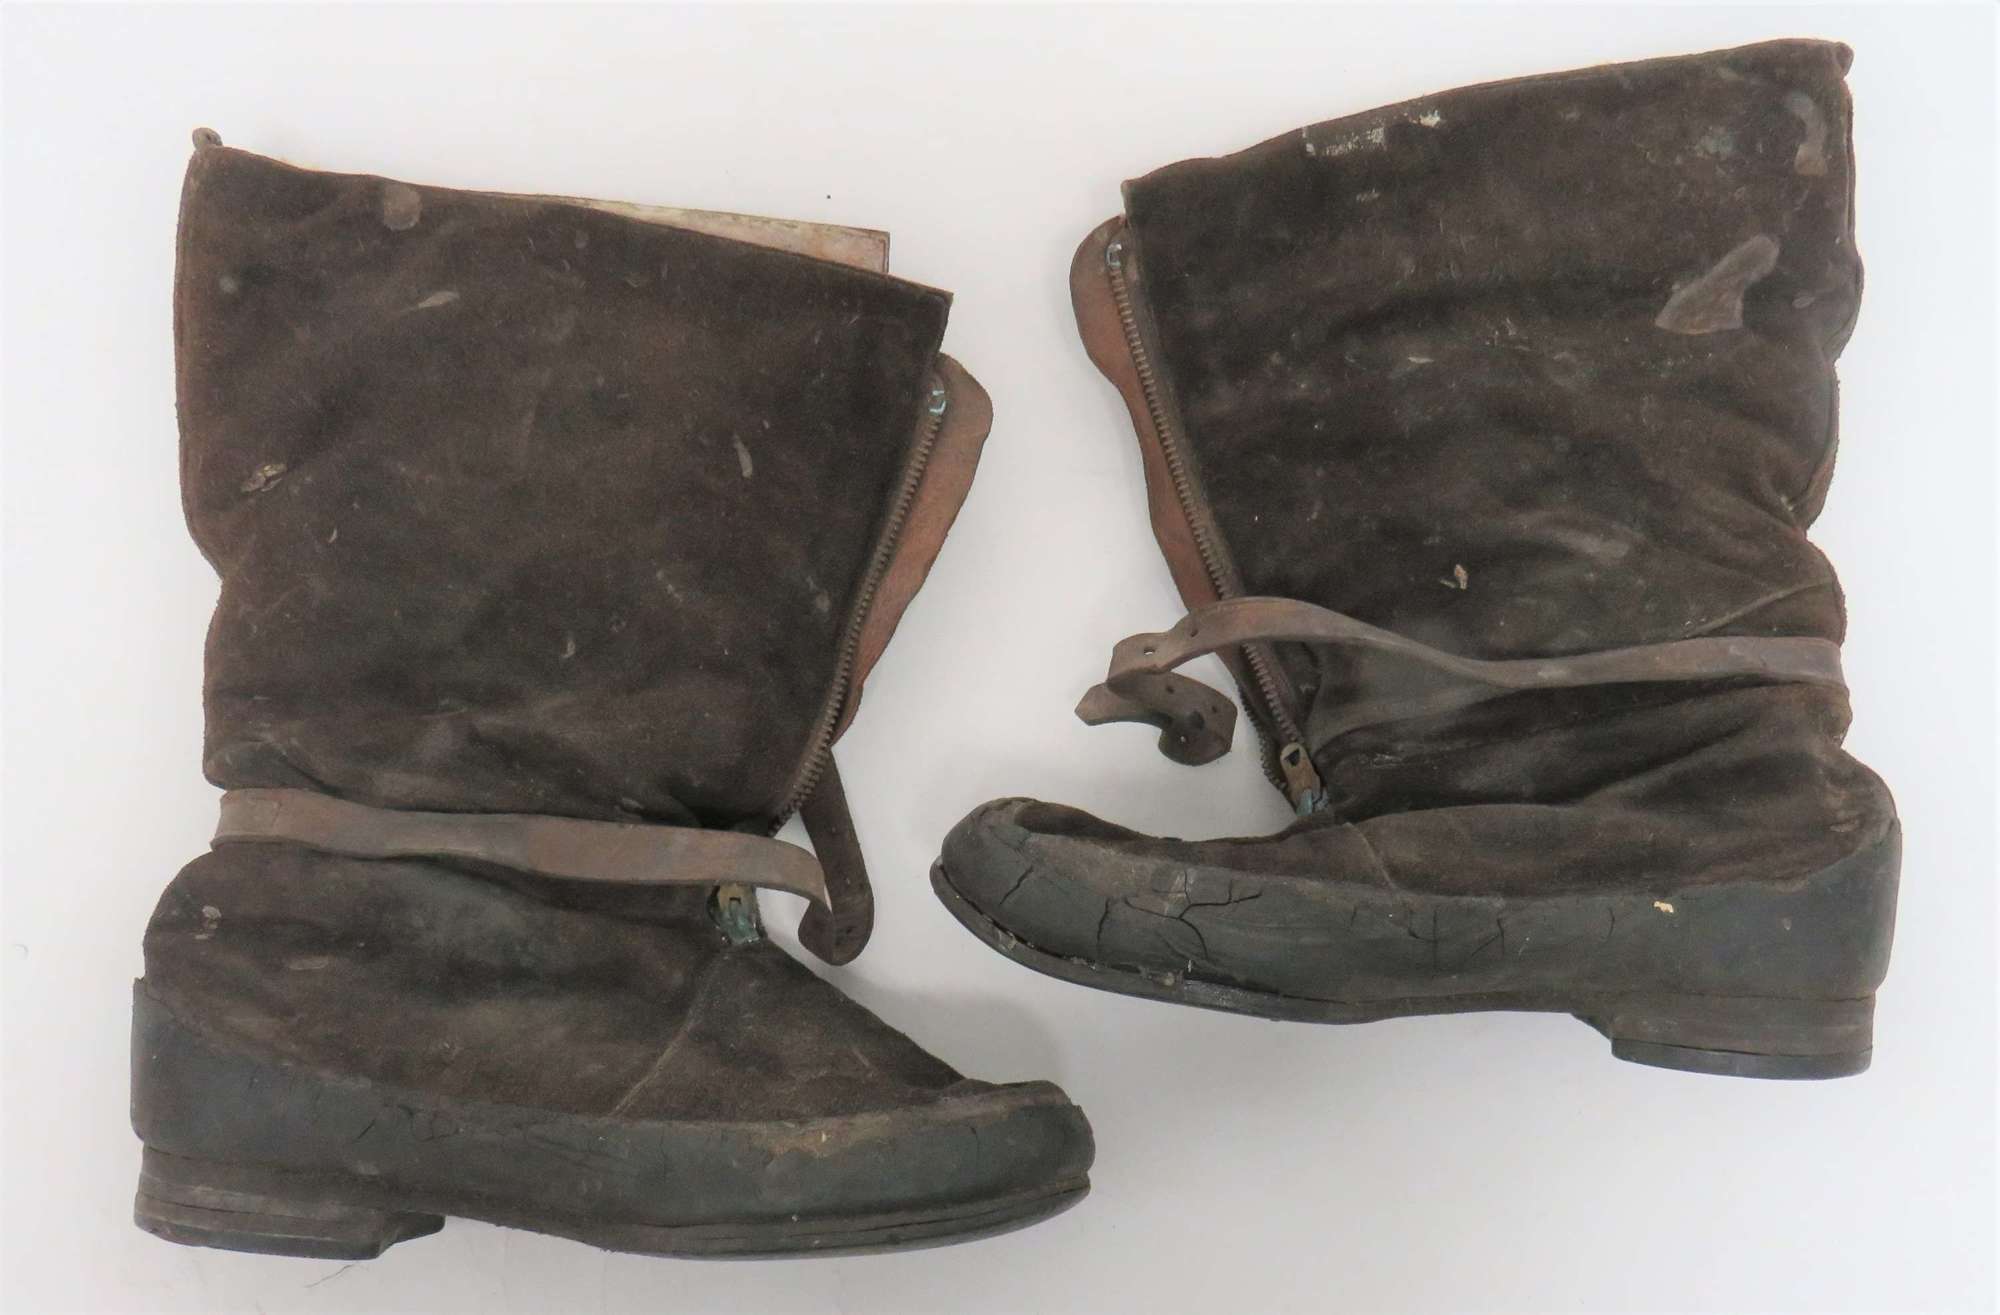 Royal Air Force 1941 Pattern Aircrew Flying Boots